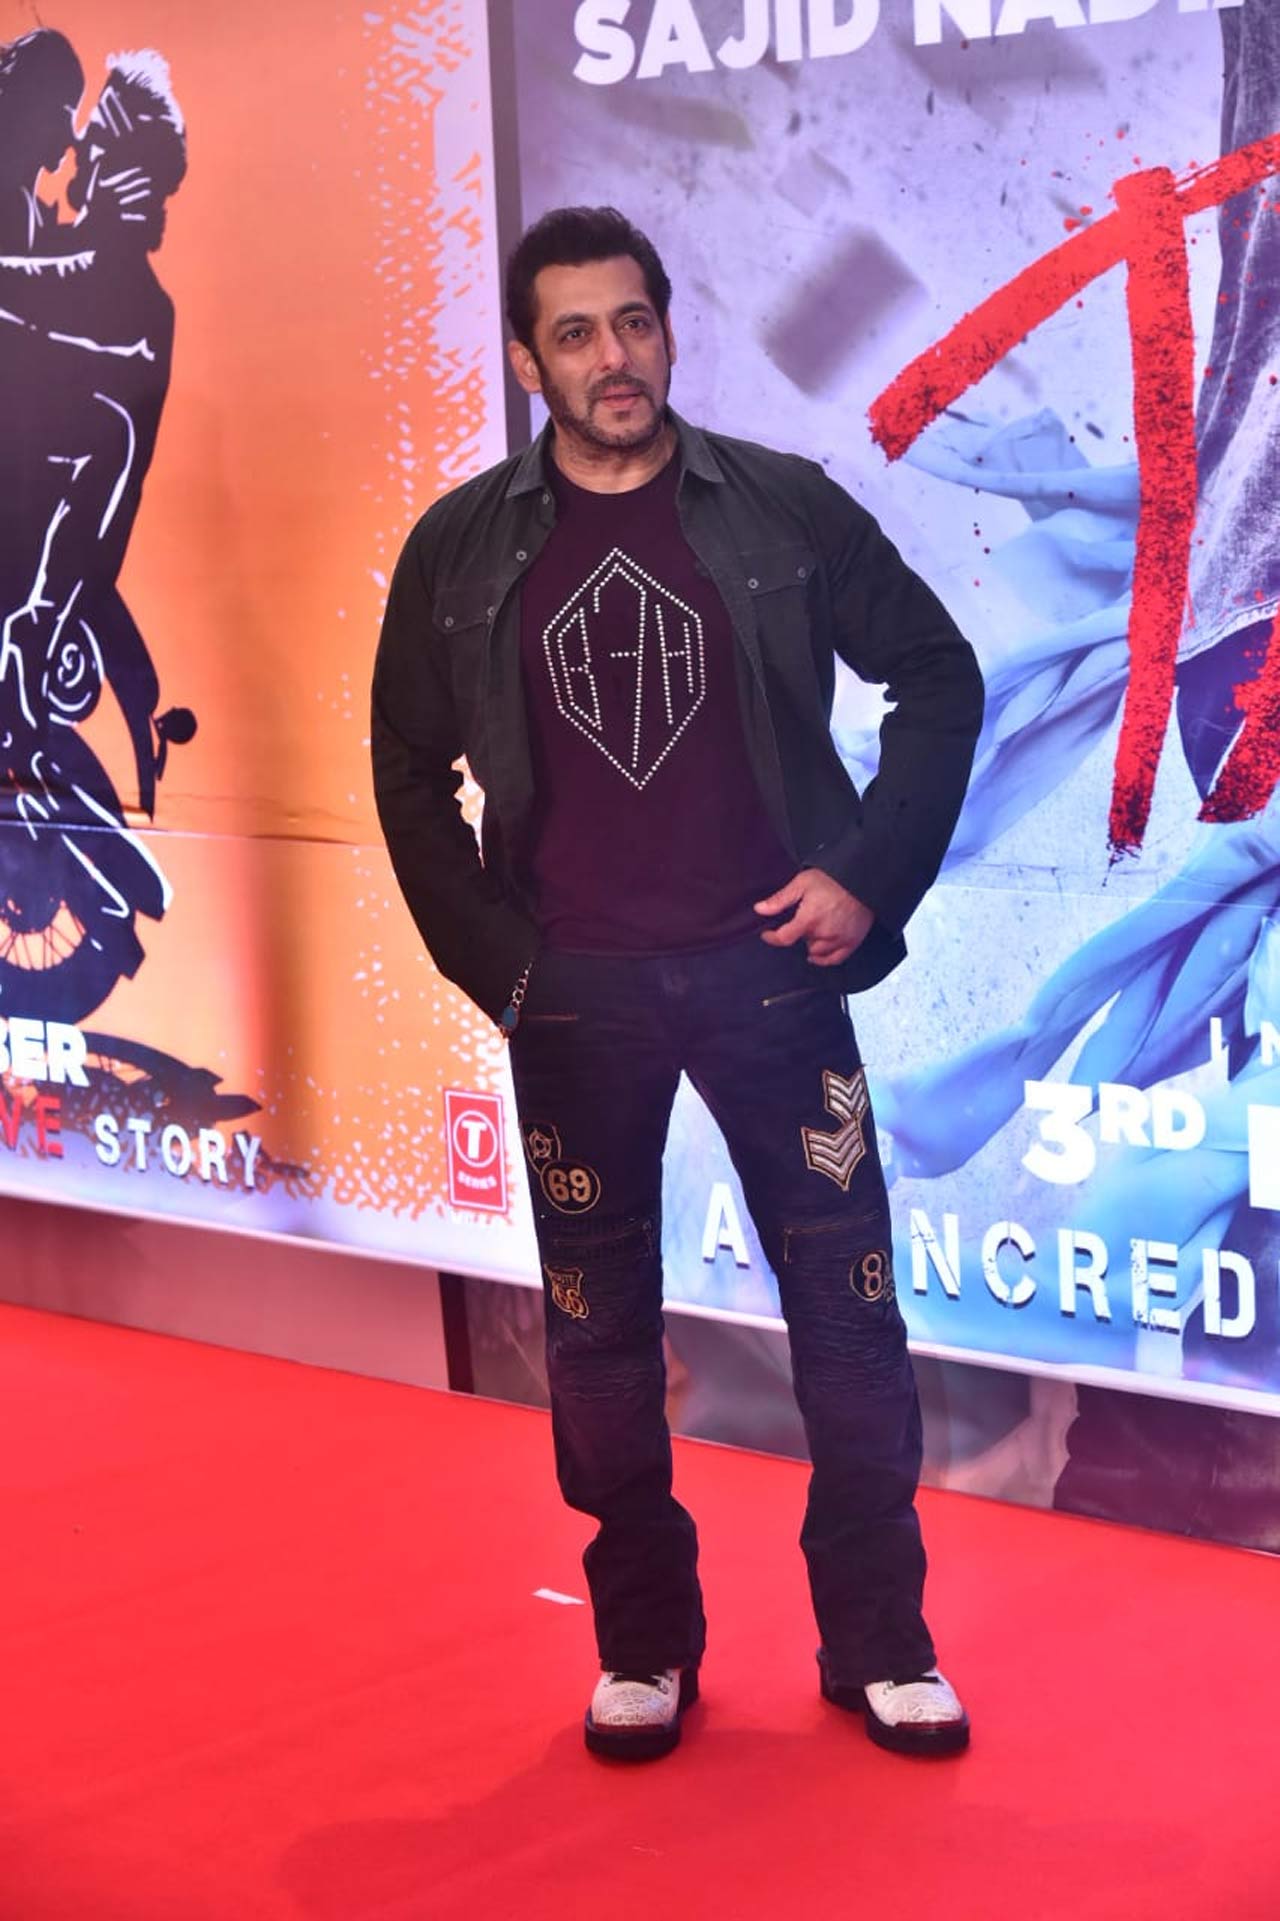 Salman Khan showed up at the premiere to extend his support to the debutant Ahan Shetty at the Tadap premiere.